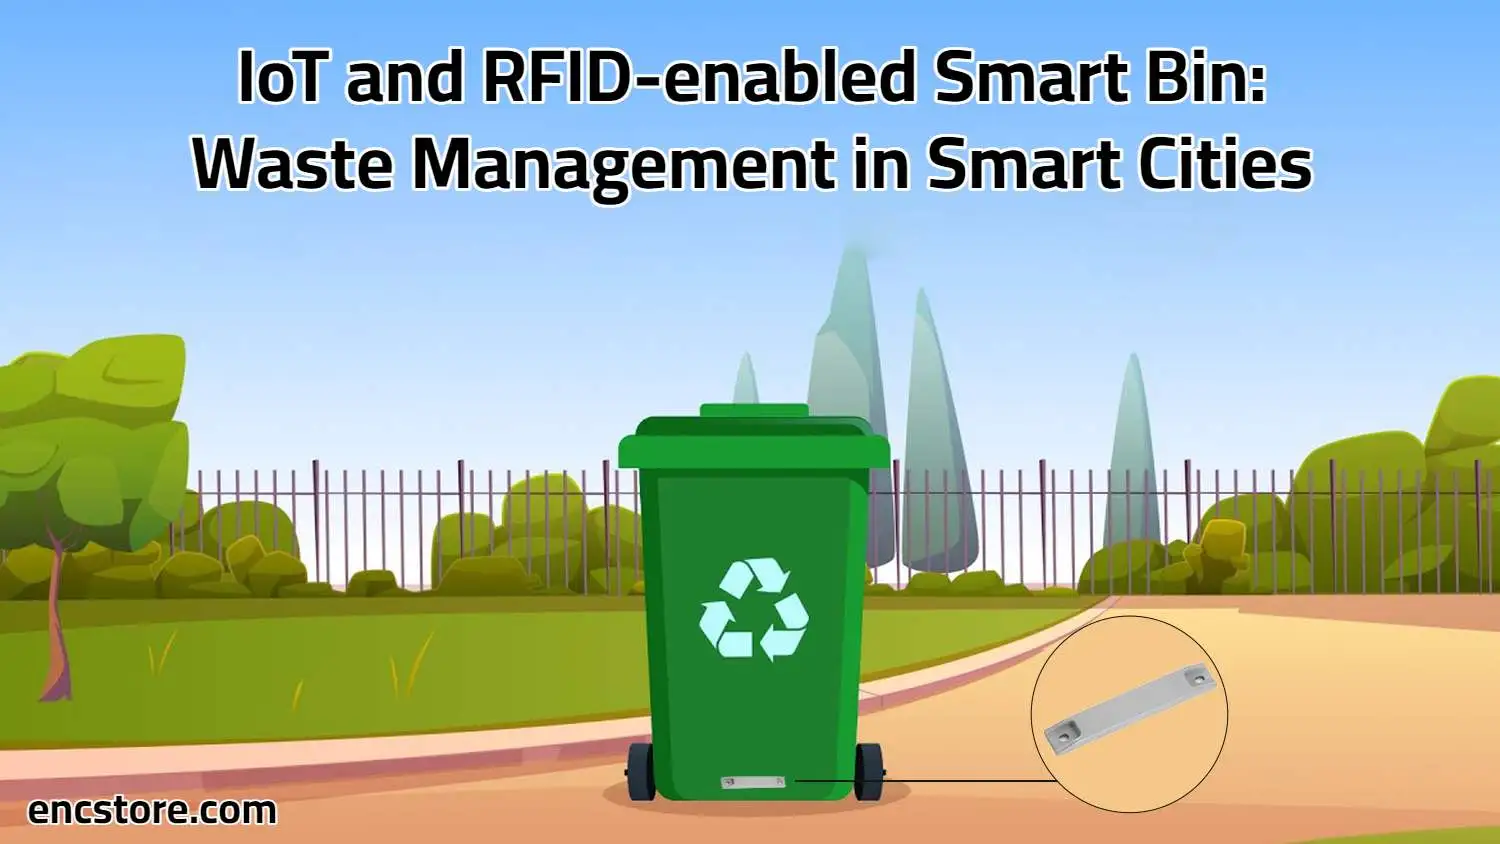 IoT and RFID-enabled Smart Bin